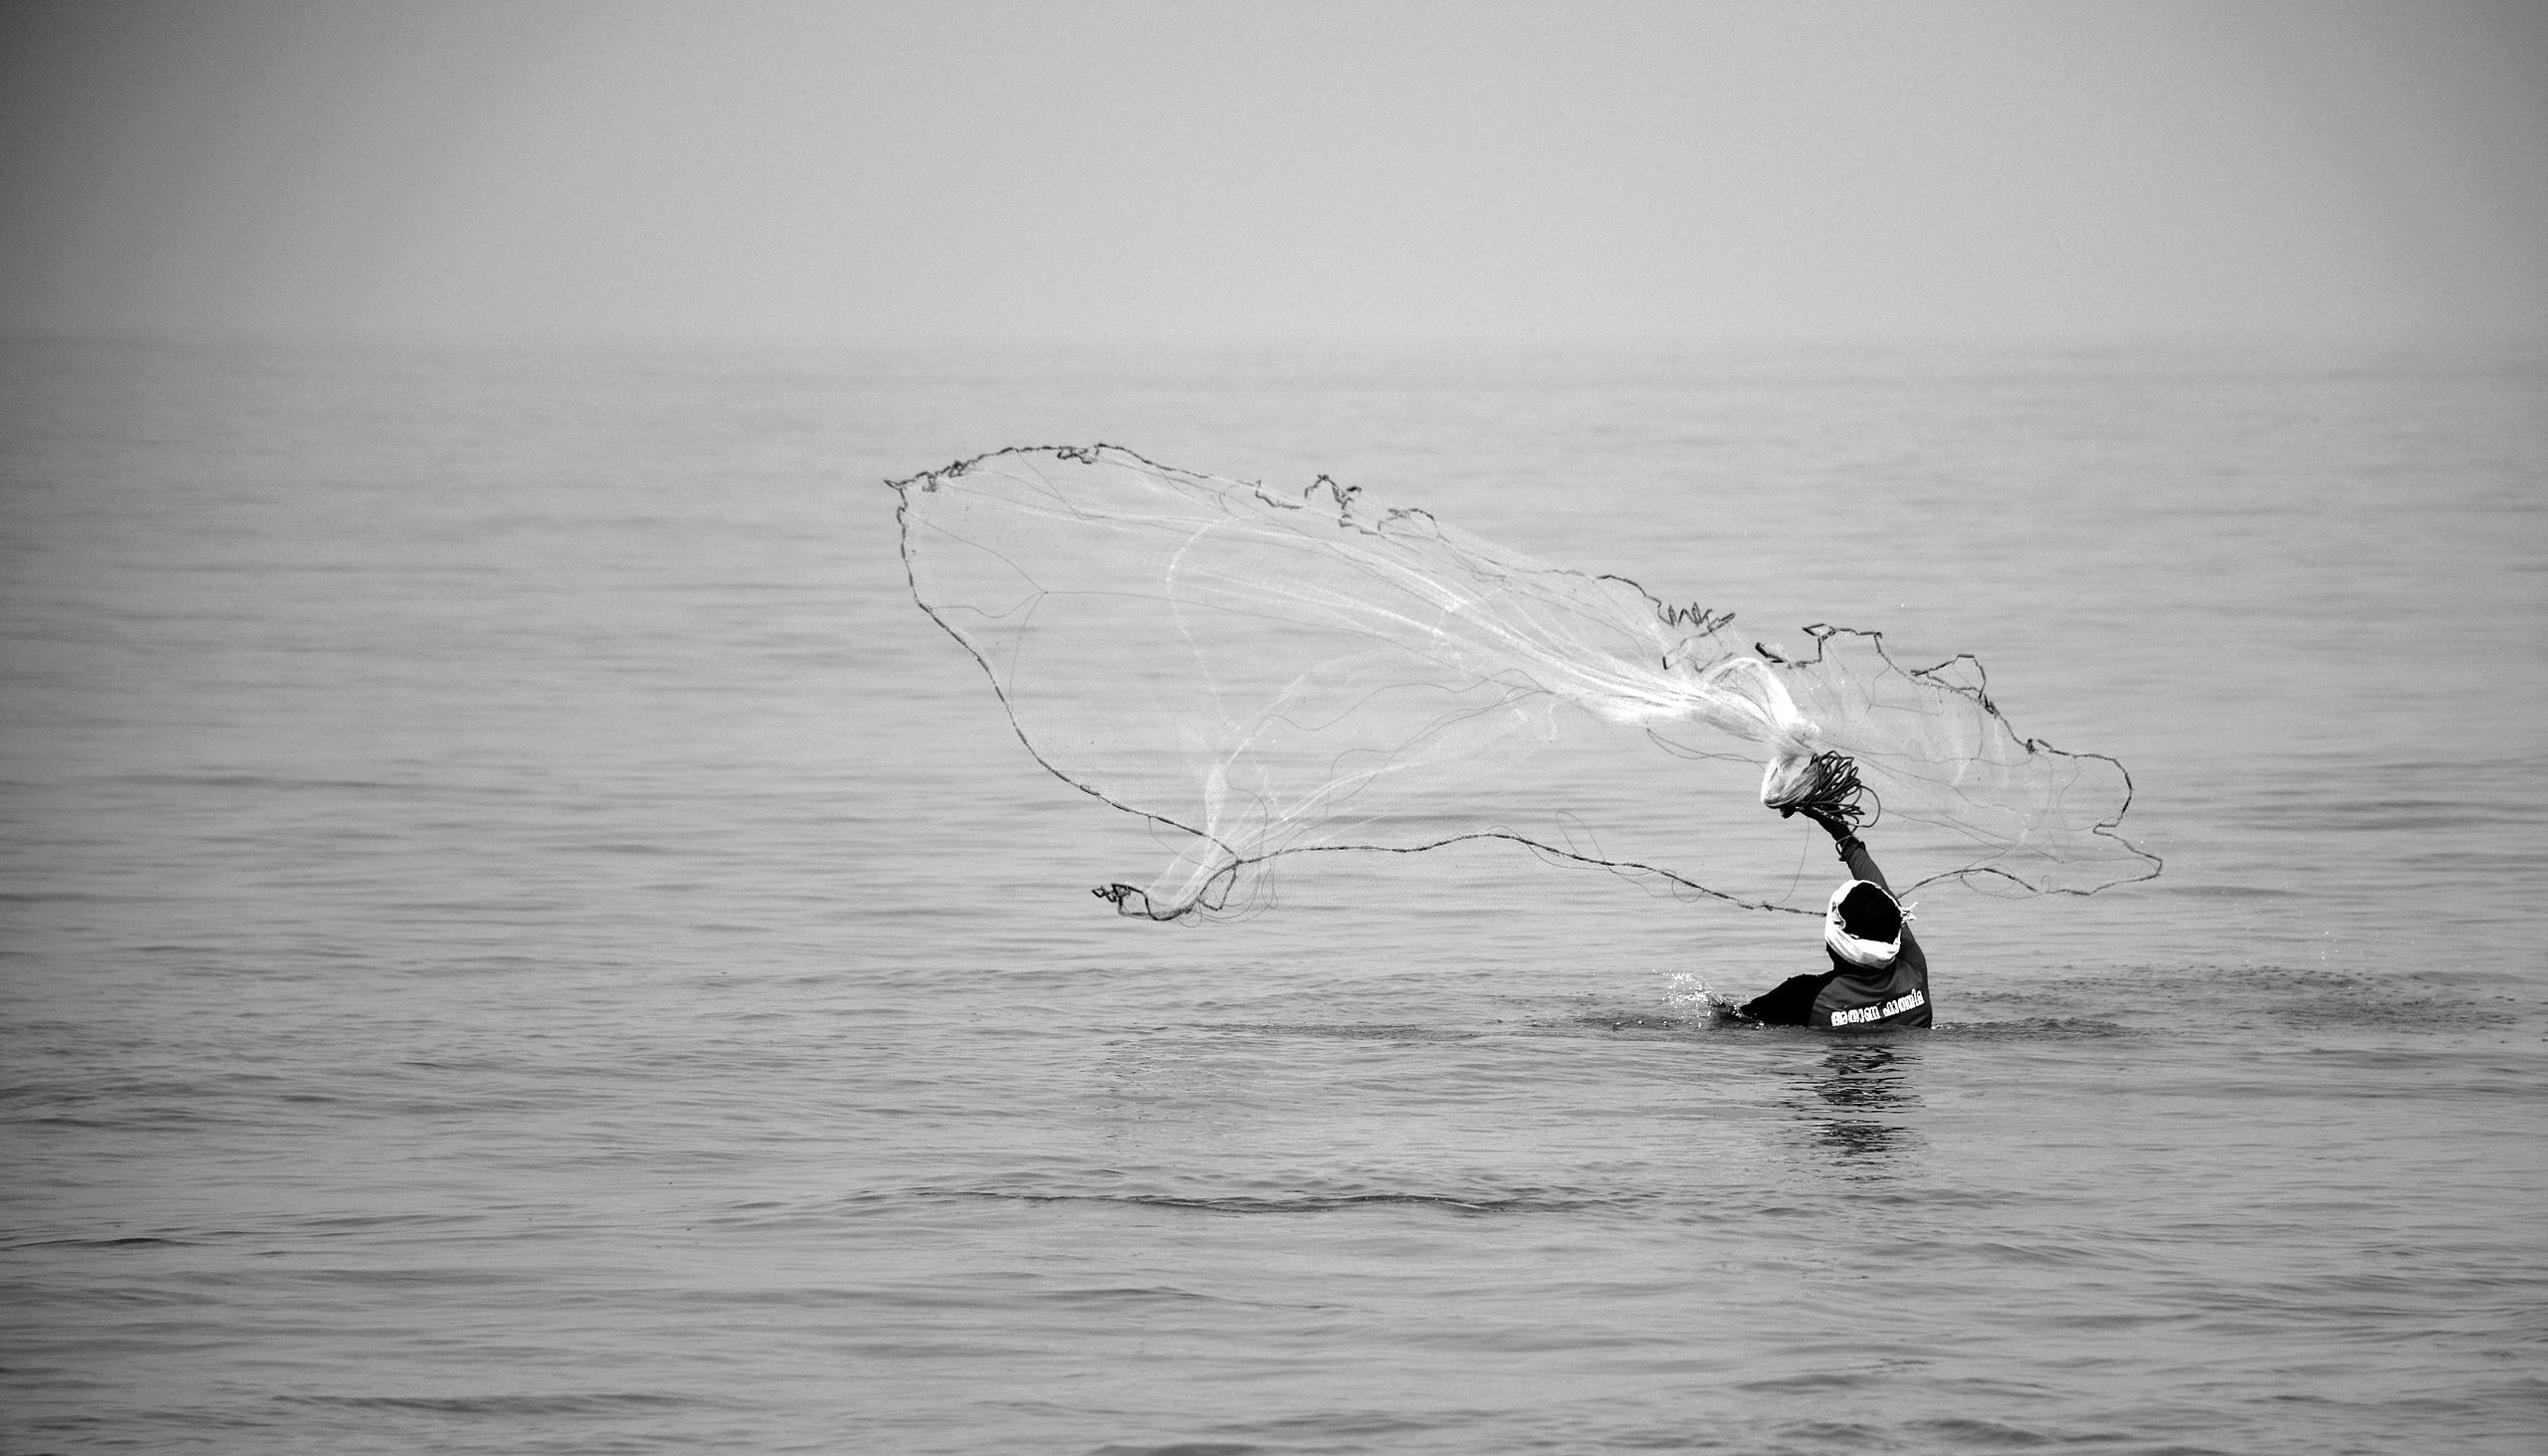 File:Fishing with cast-net from a boat near Kozhikode Beach.jpg - Wikimedia  Commons